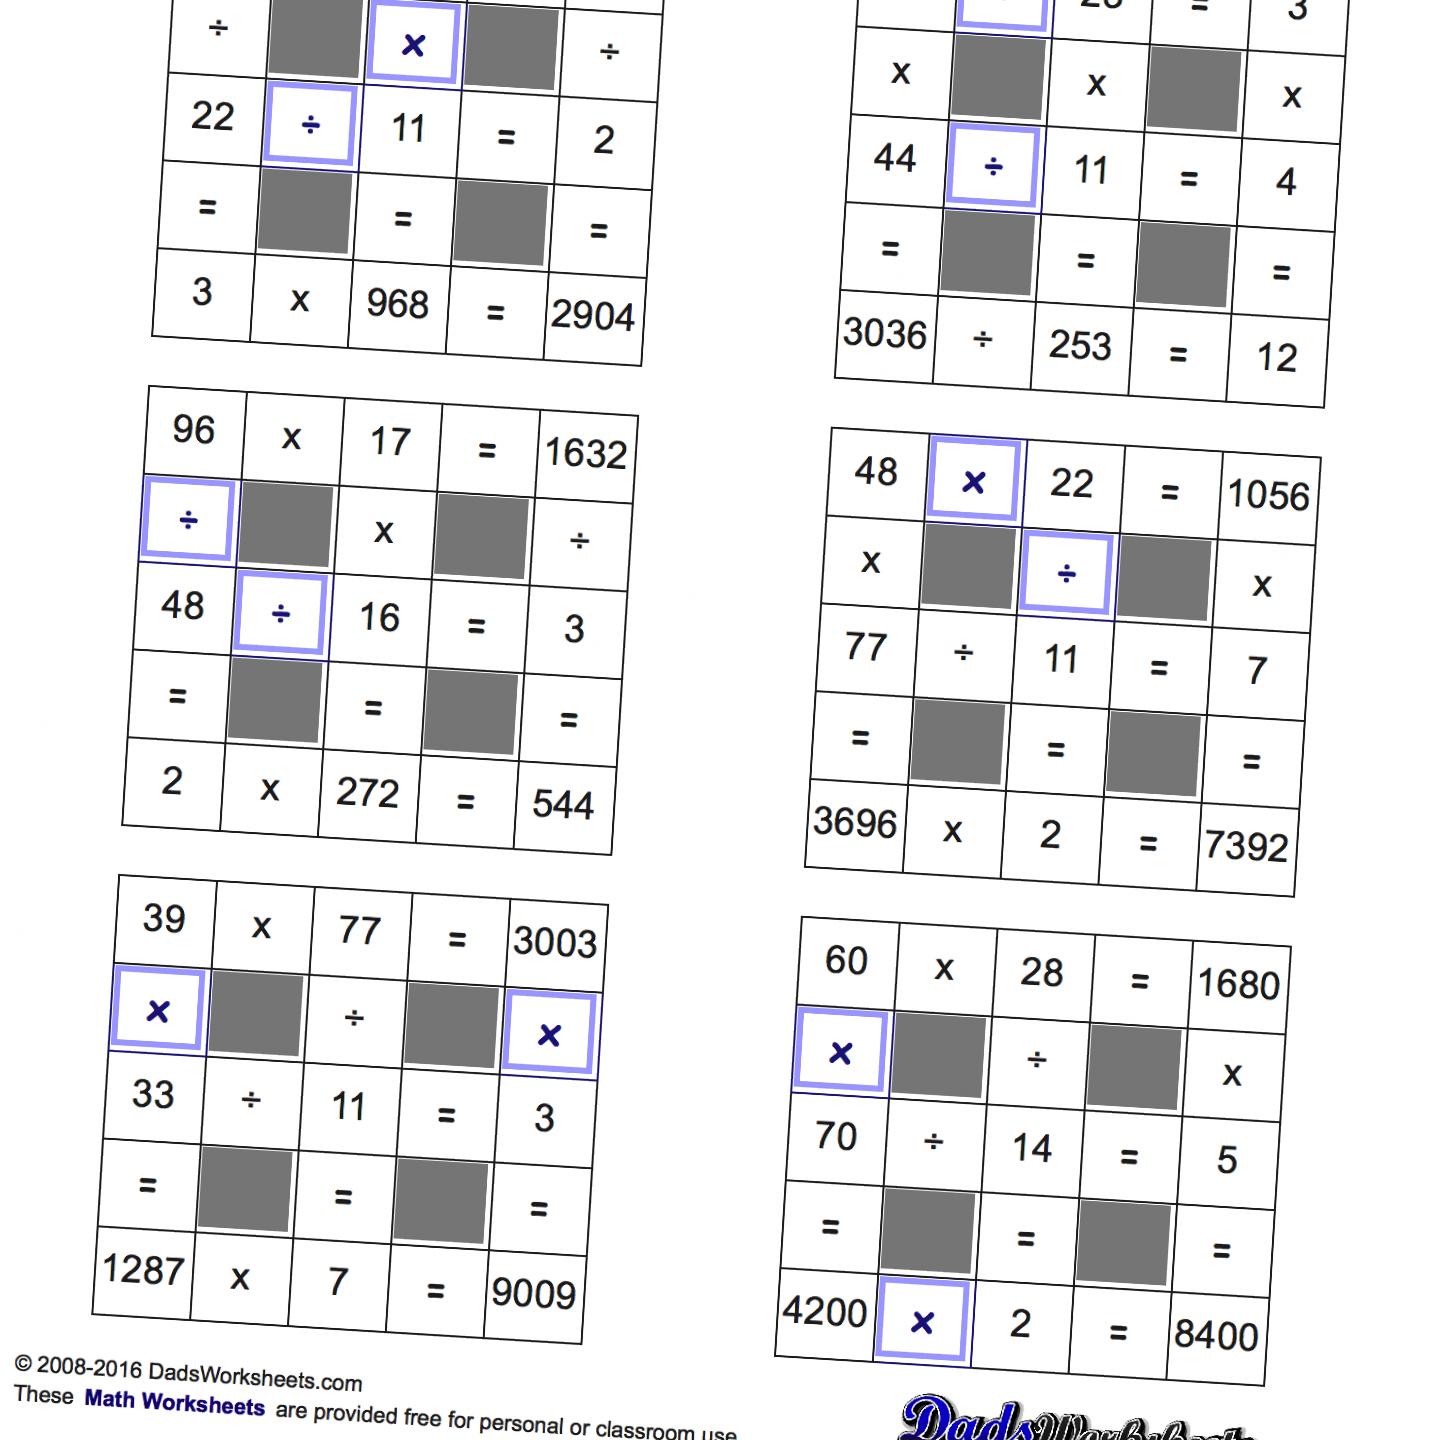 math-worksheets-grid-puzzles-multiplication-and-division